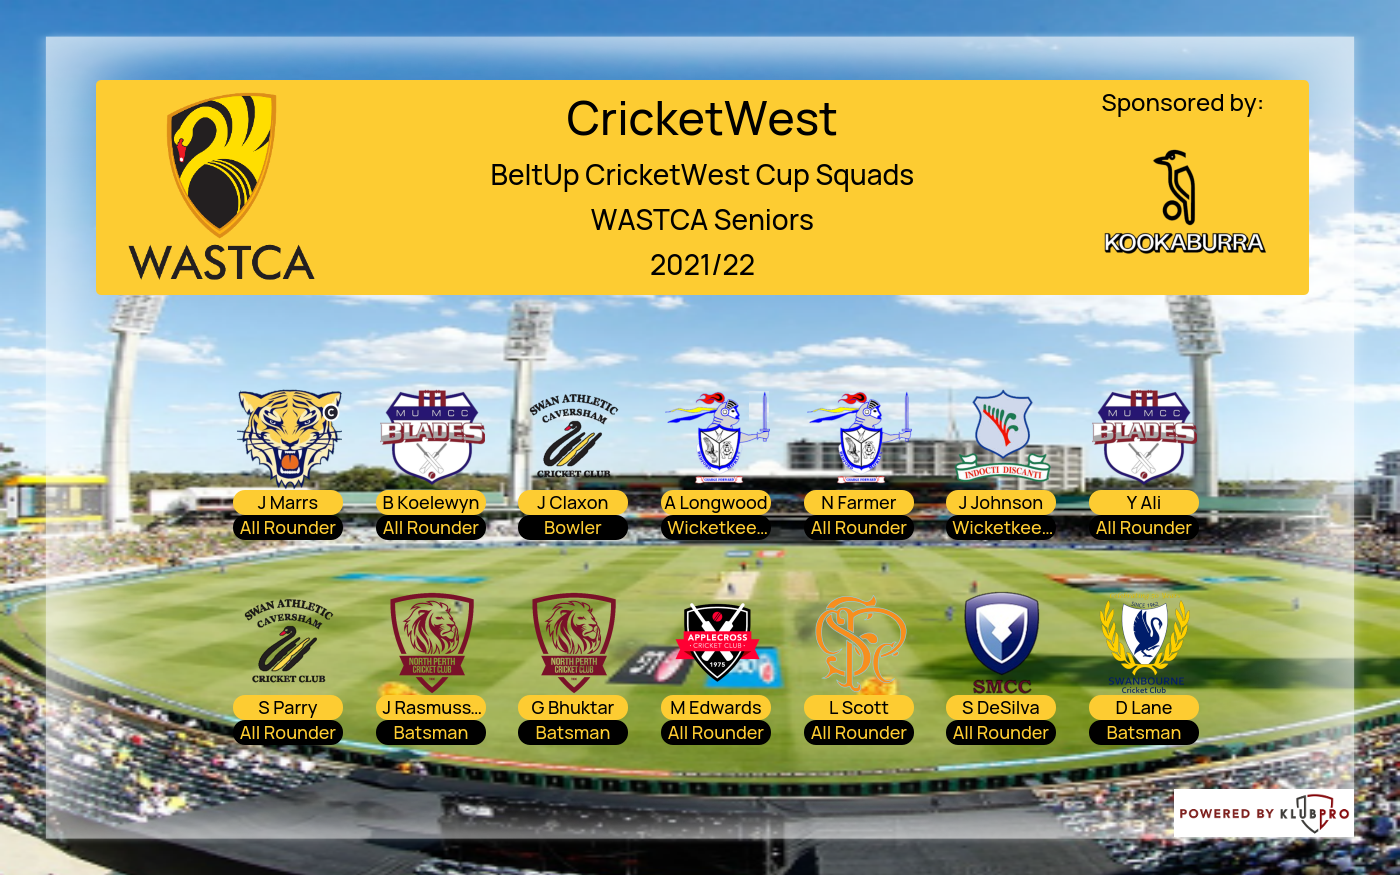 WCA - Wada Cricket Association by CRICHEROES PRIVATE LIMITED